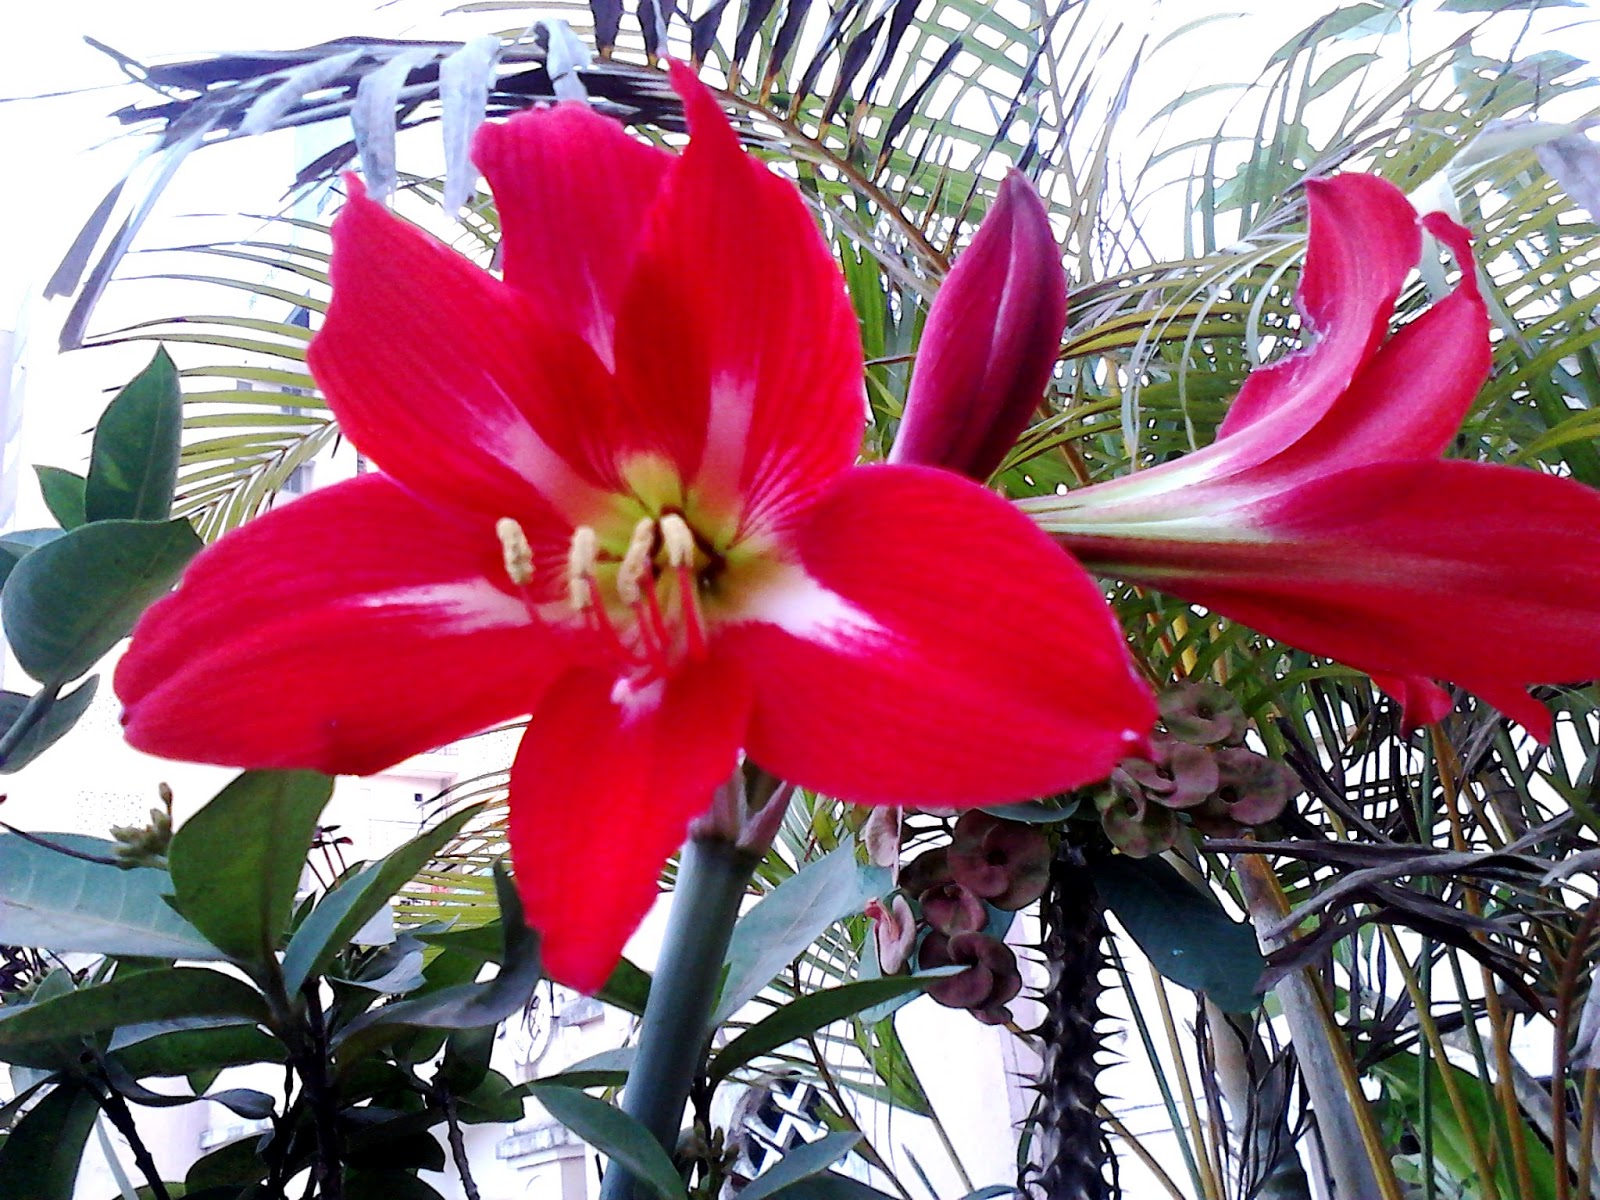 Garden Care Simplified: Big Amaryllis Red Lily Flowering Plant Tips